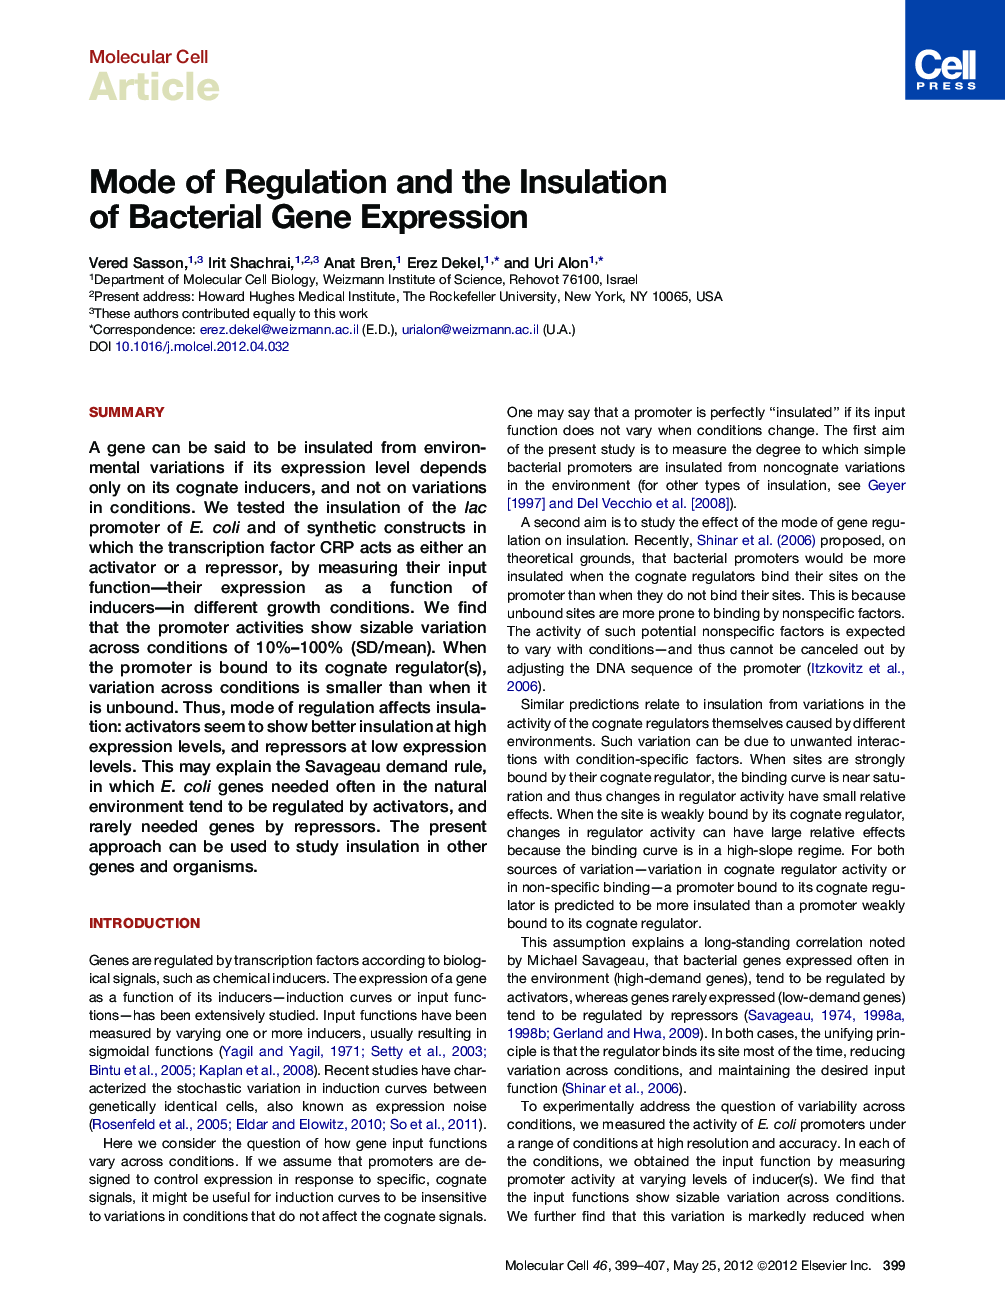 Mode of Regulation and the Insulation of Bacterial Gene Expression